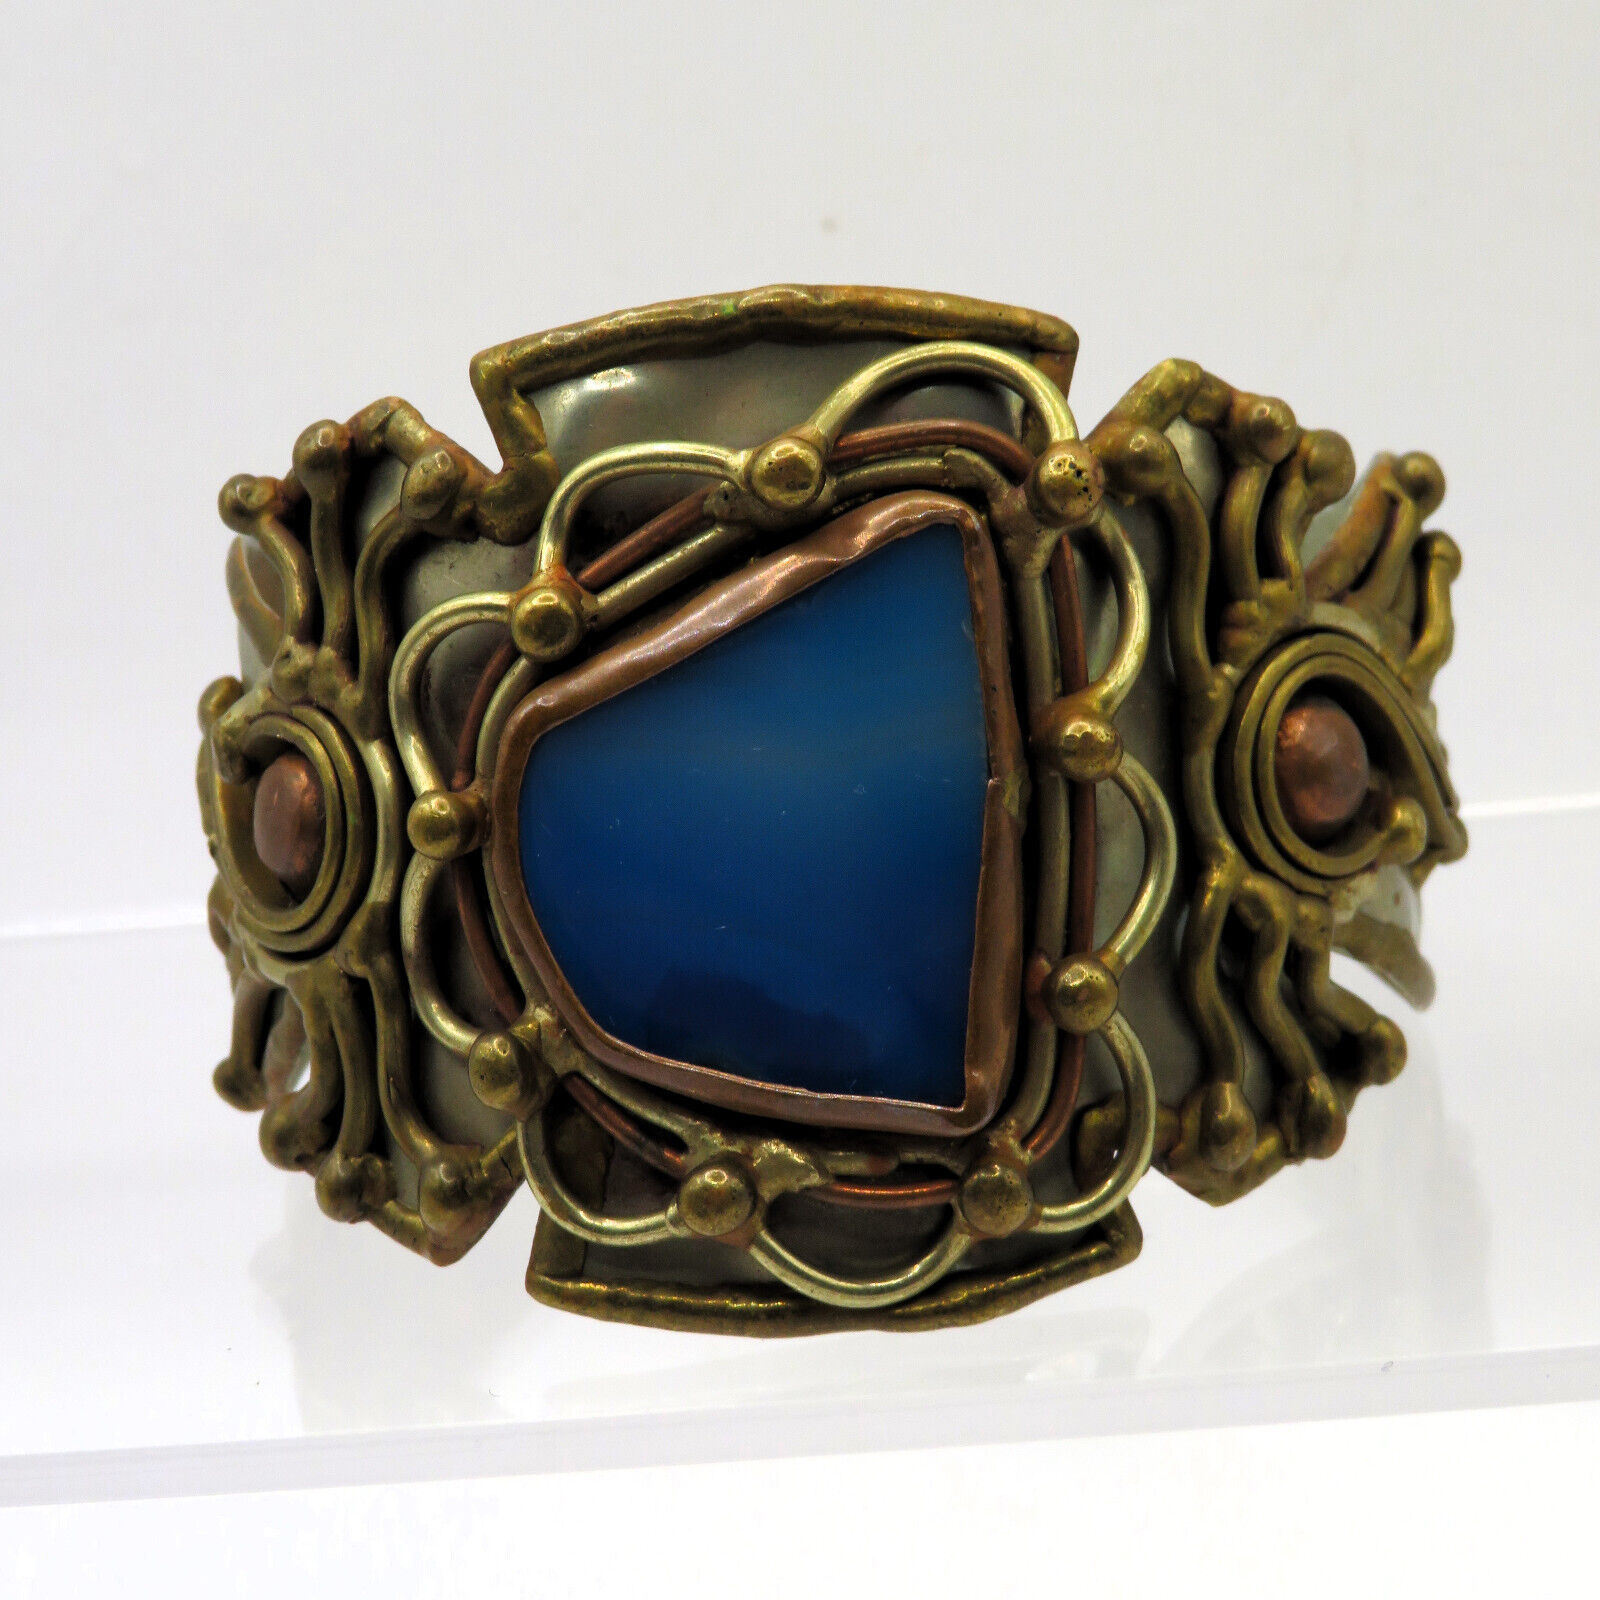 STUNNING Vintage Artisan Made BLUE AGATE Mixed Metal Cuff Bracelet ONE of KIND